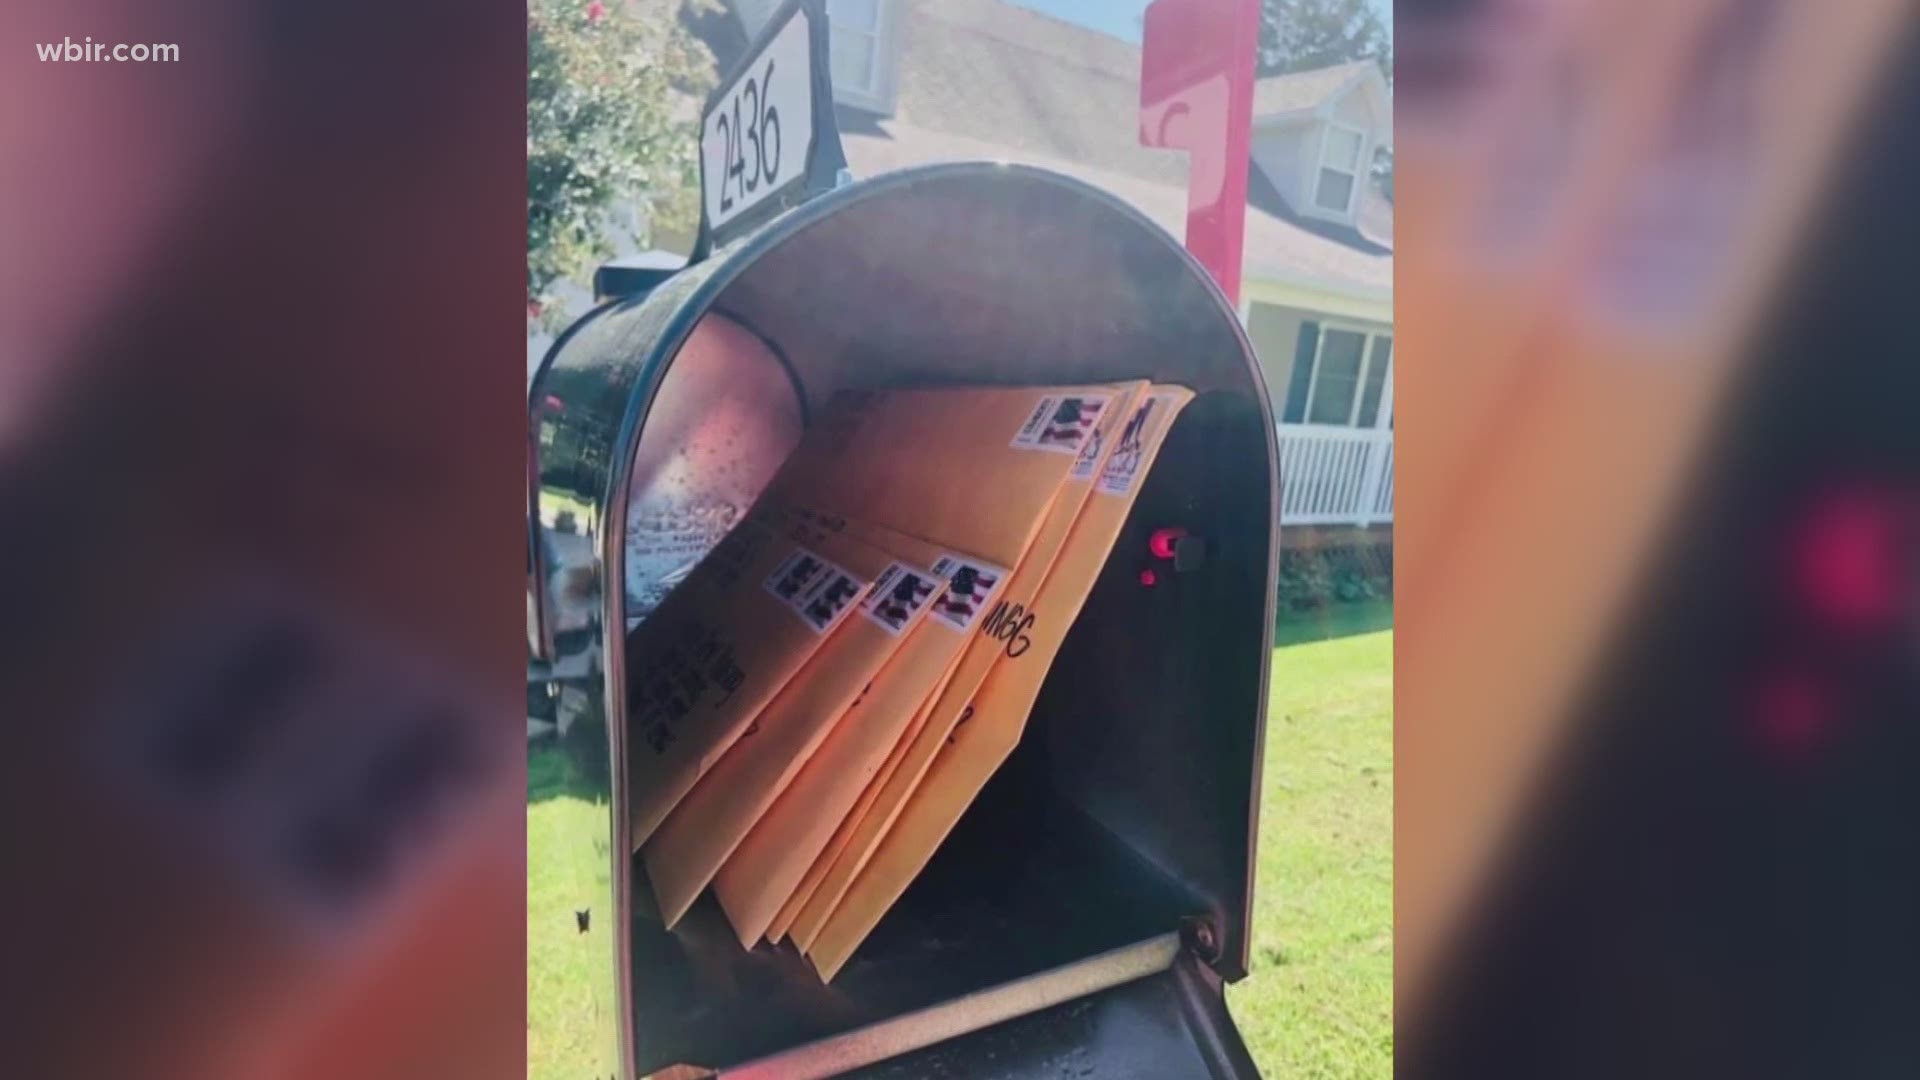 Knoxville woman writes more than 850 letters to send smiles to others